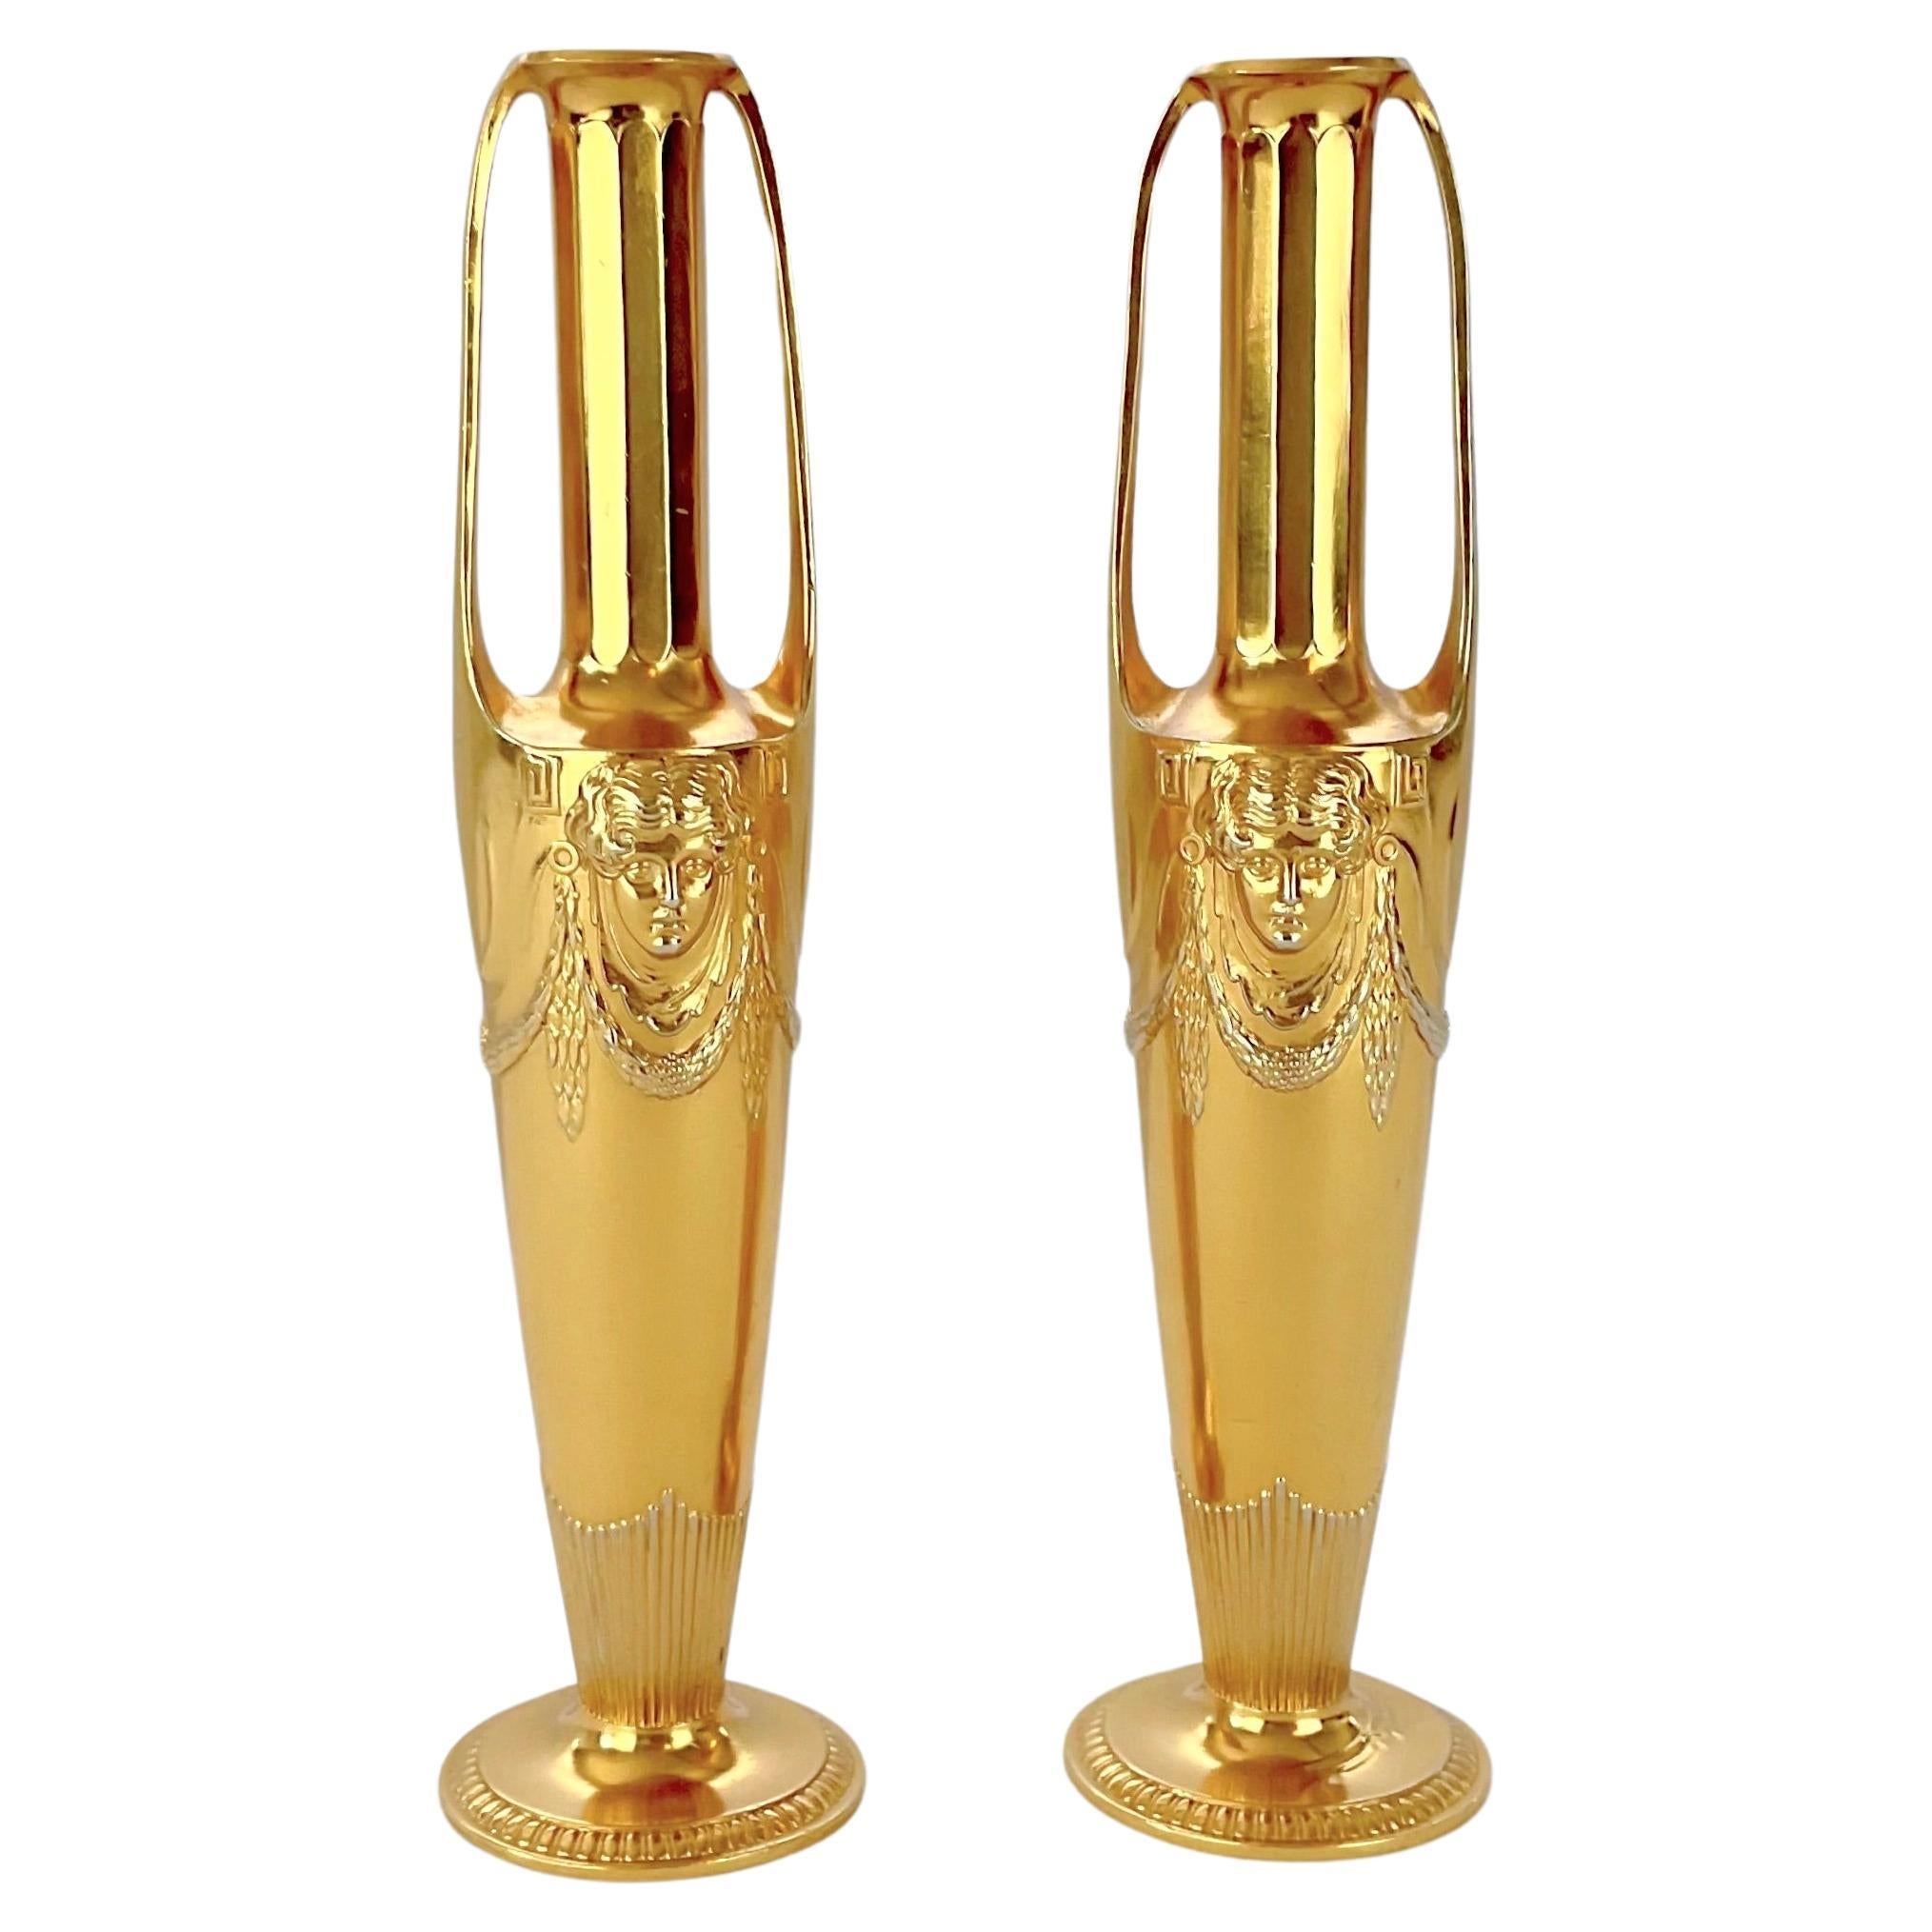 Antique Gilt Metal Vase Pair in Neoclassical Style by Orivit AG of Germany For Sale